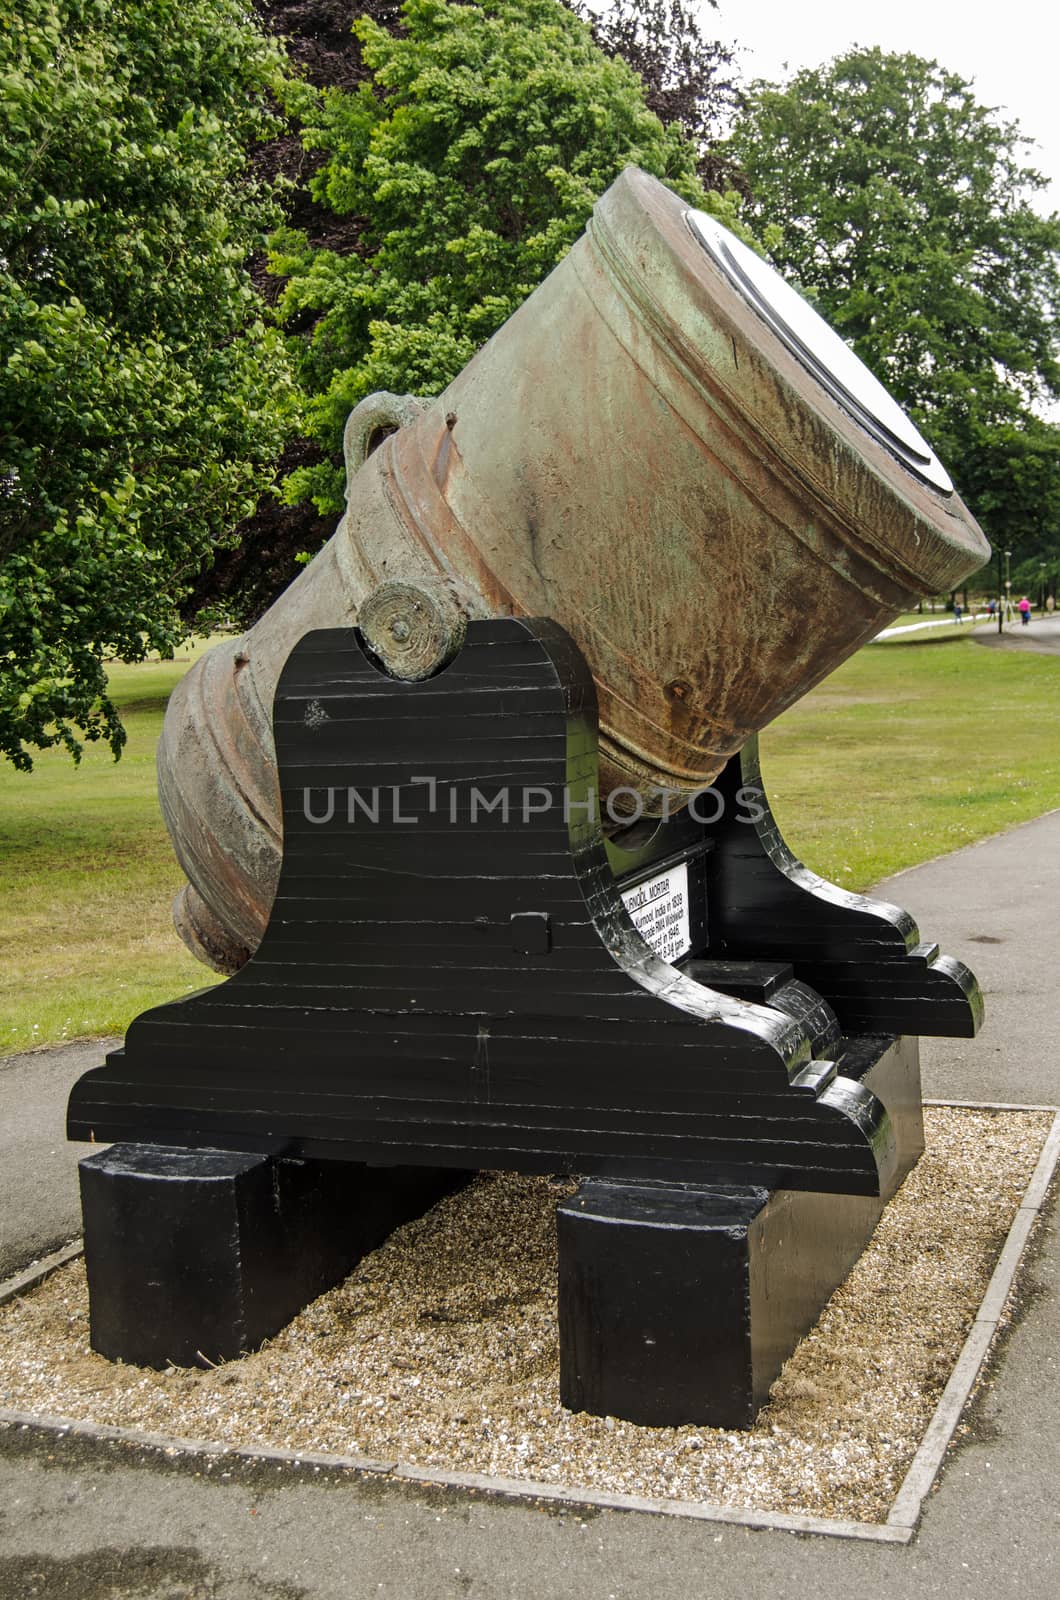 The historic Kurnool Mortar, a huge artillery weapon taken by the British from Andhra Pradesh in India in 1839.  On display at the famous Sandhurst Military Academy in Berkshire.